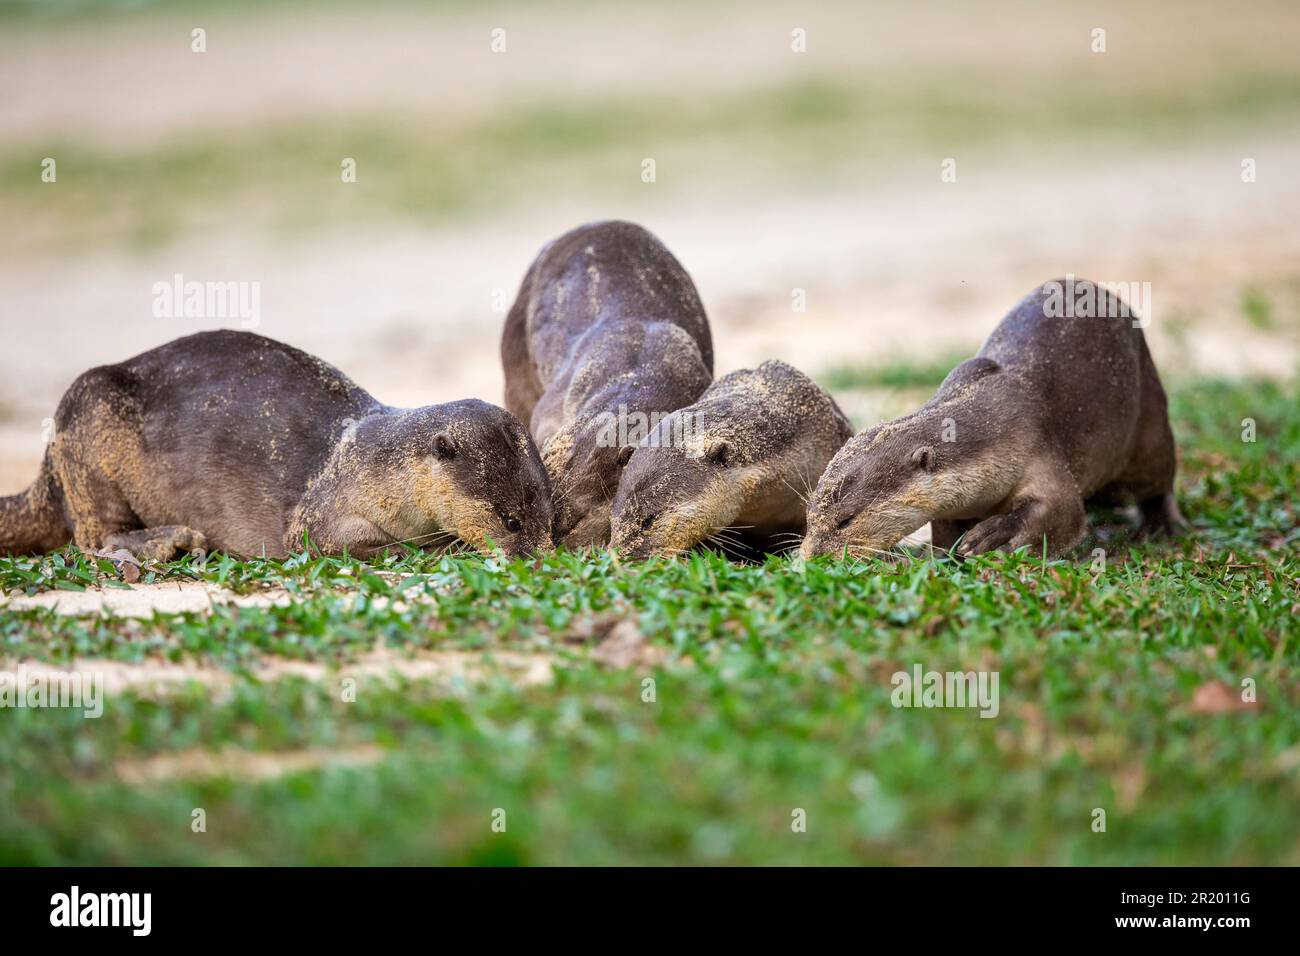 A family of four smooth coated otter sniff the scent of spraint on the grass next to a beach, Singapore Stock Photo